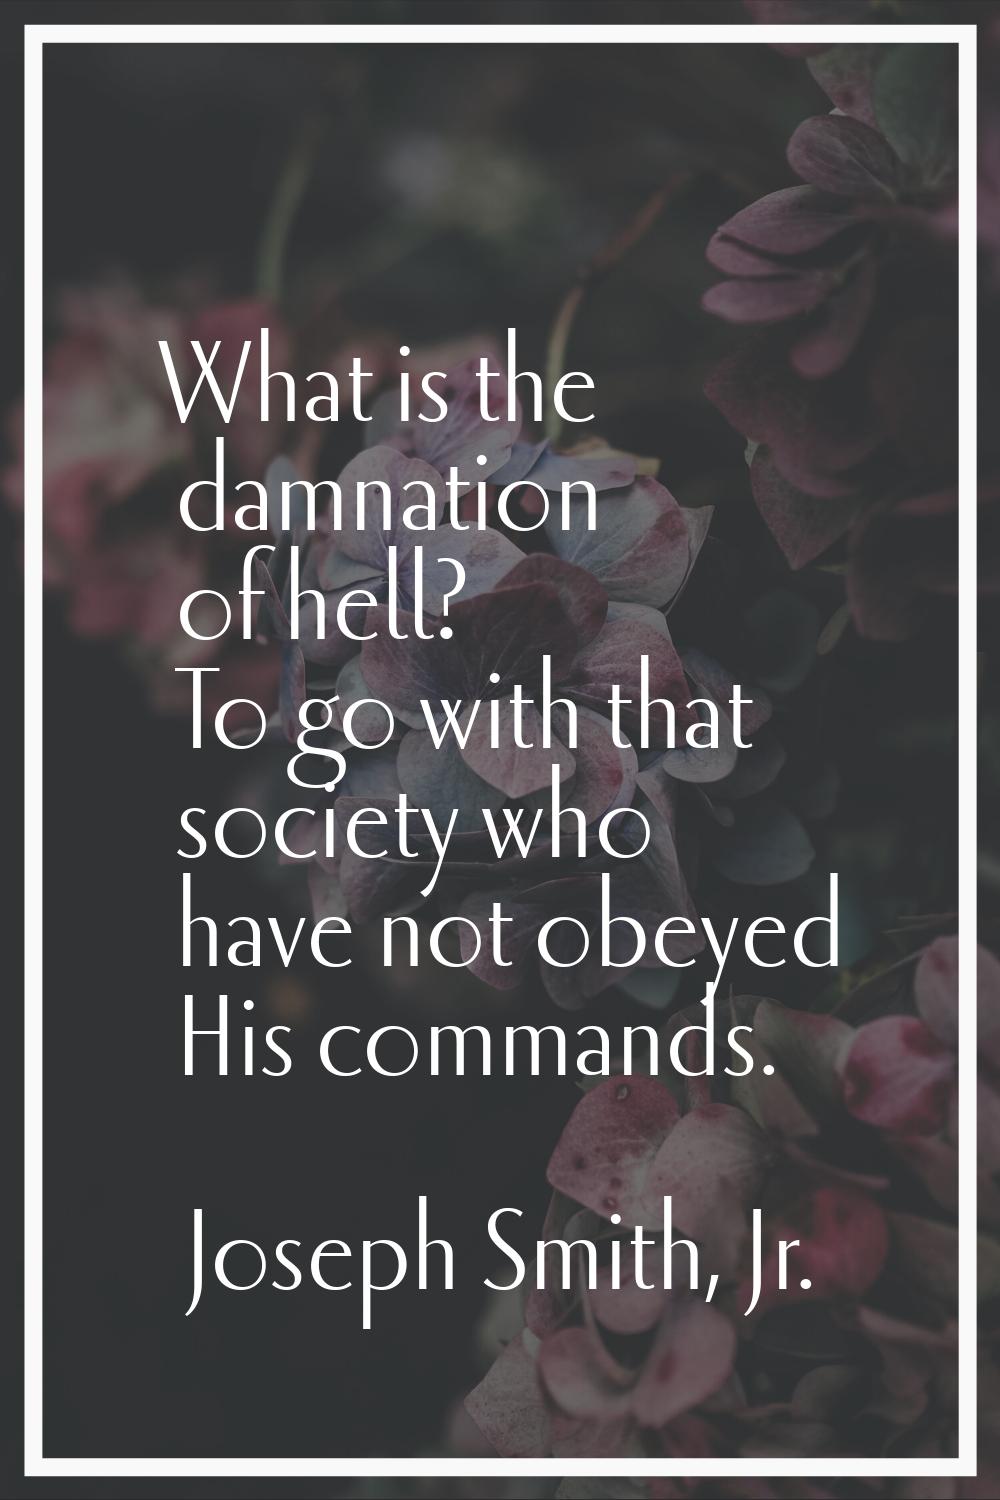 What is the damnation of hell? To go with that society who have not obeyed His commands.